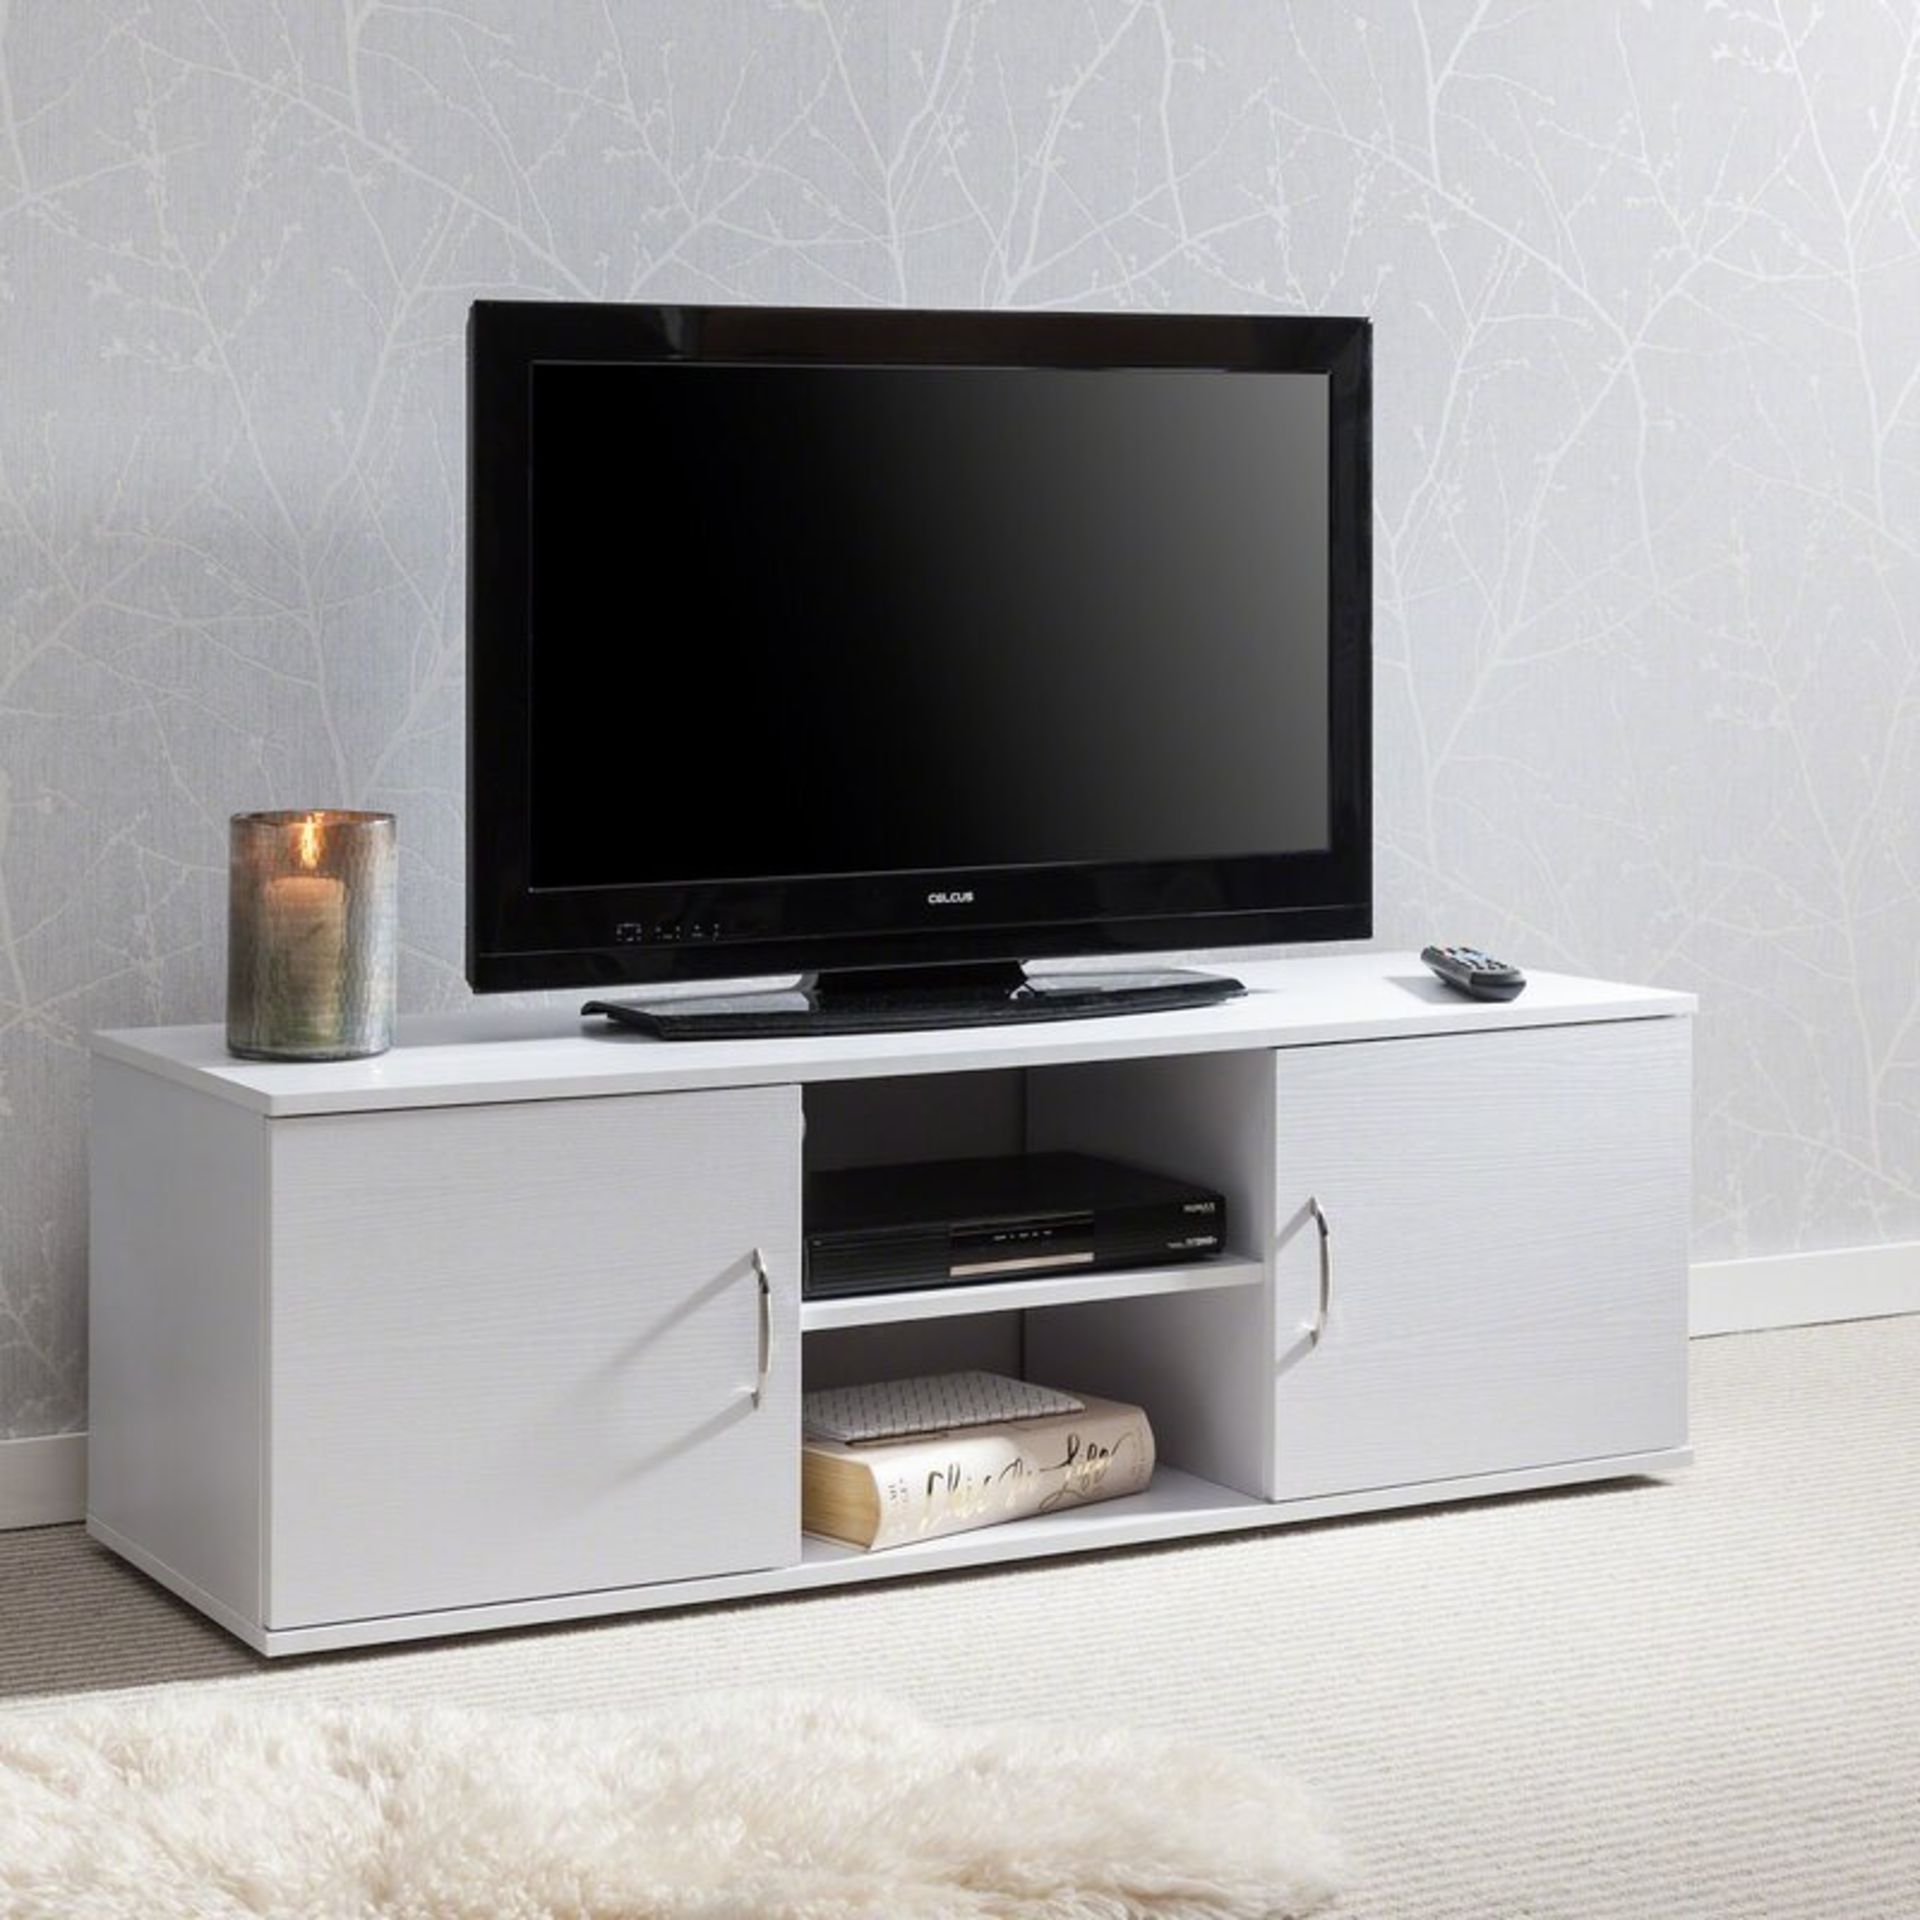 Alexys TV Stand White - RRP £56.99 - Image 2 of 3